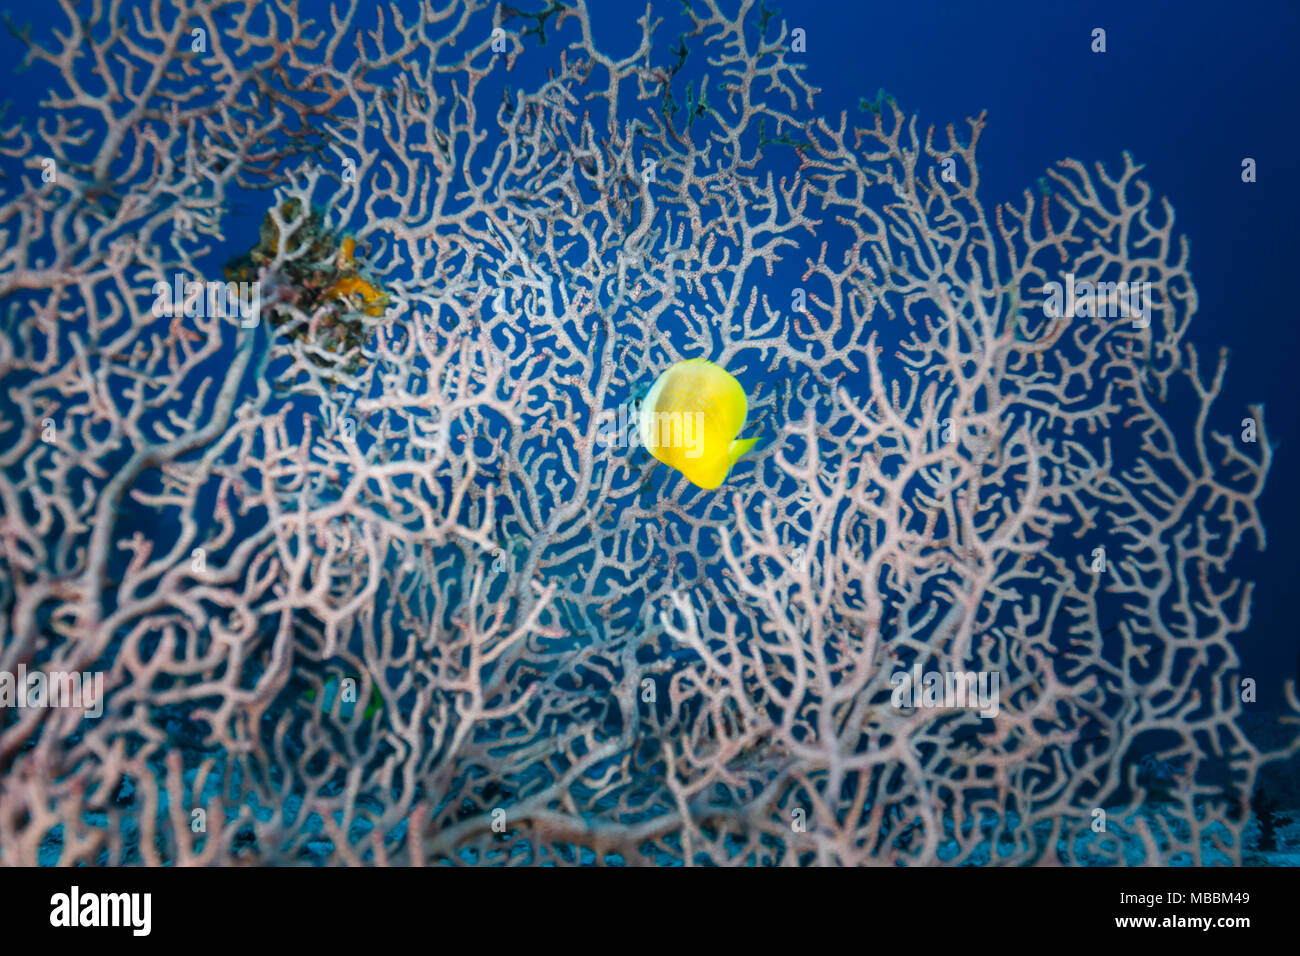 Yellow fish swims in through white branching coral Acropora florida, in blue ocean Stock Photo